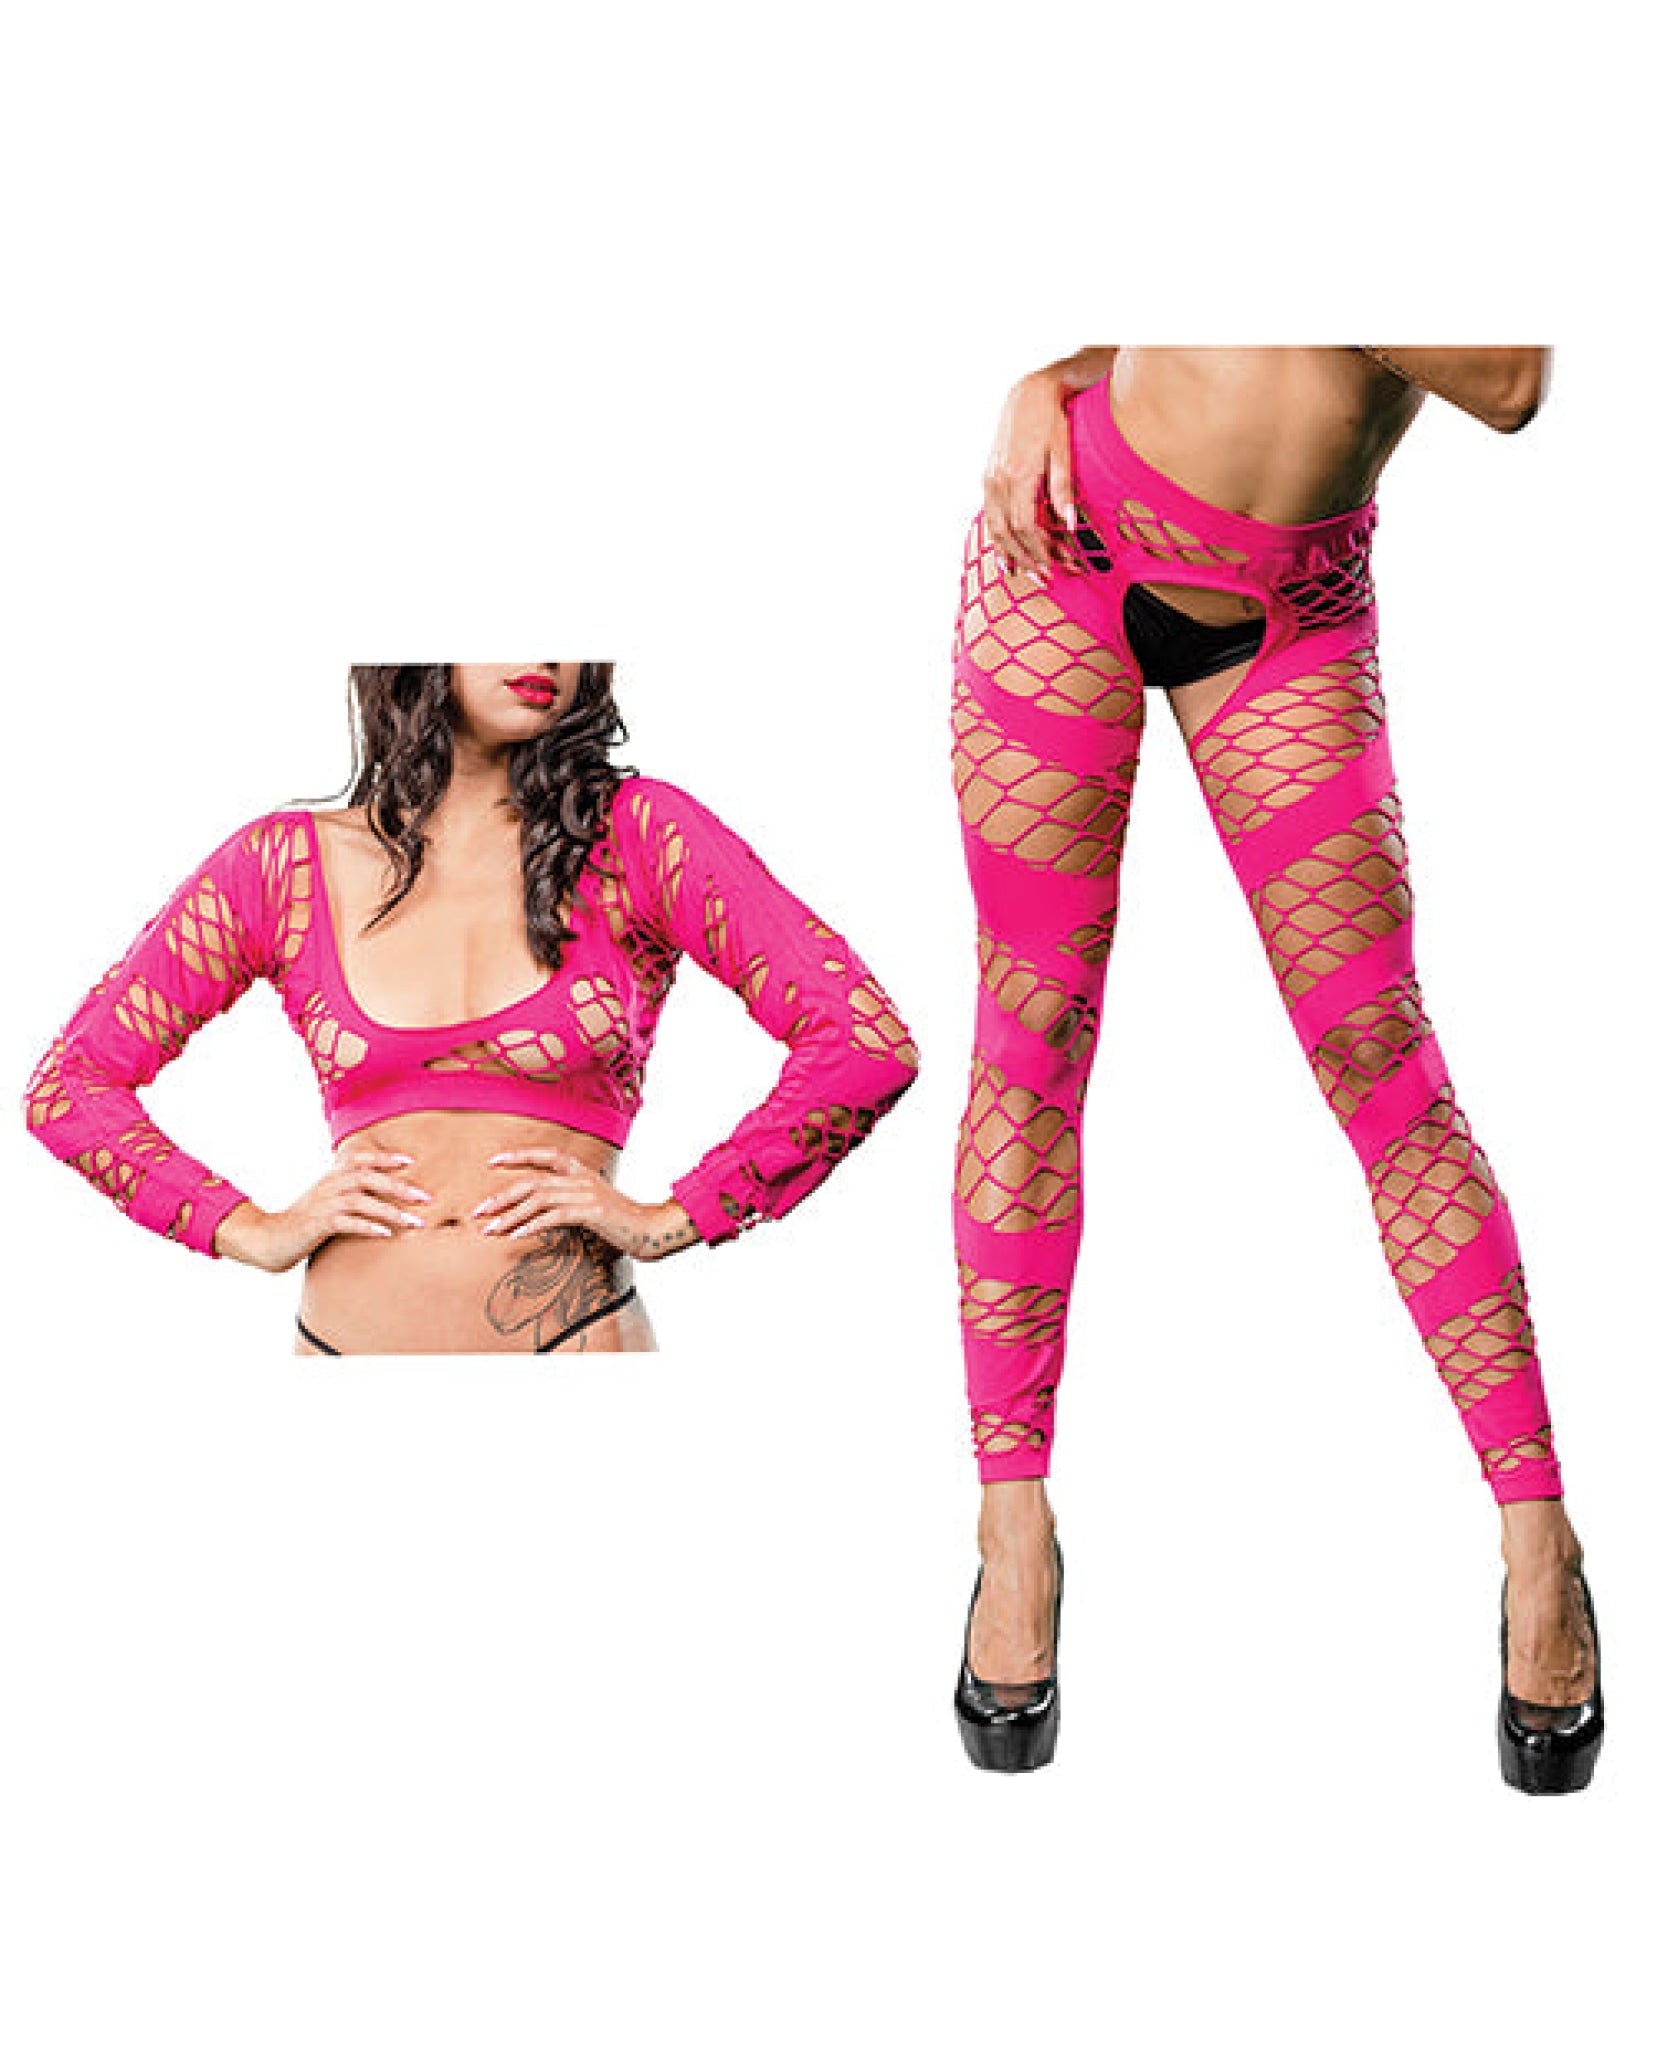 Beverly Hills Naughty Girl Crotchless Mesh & Fishnet Leggings O/s Beverly Hills Naughty Girl